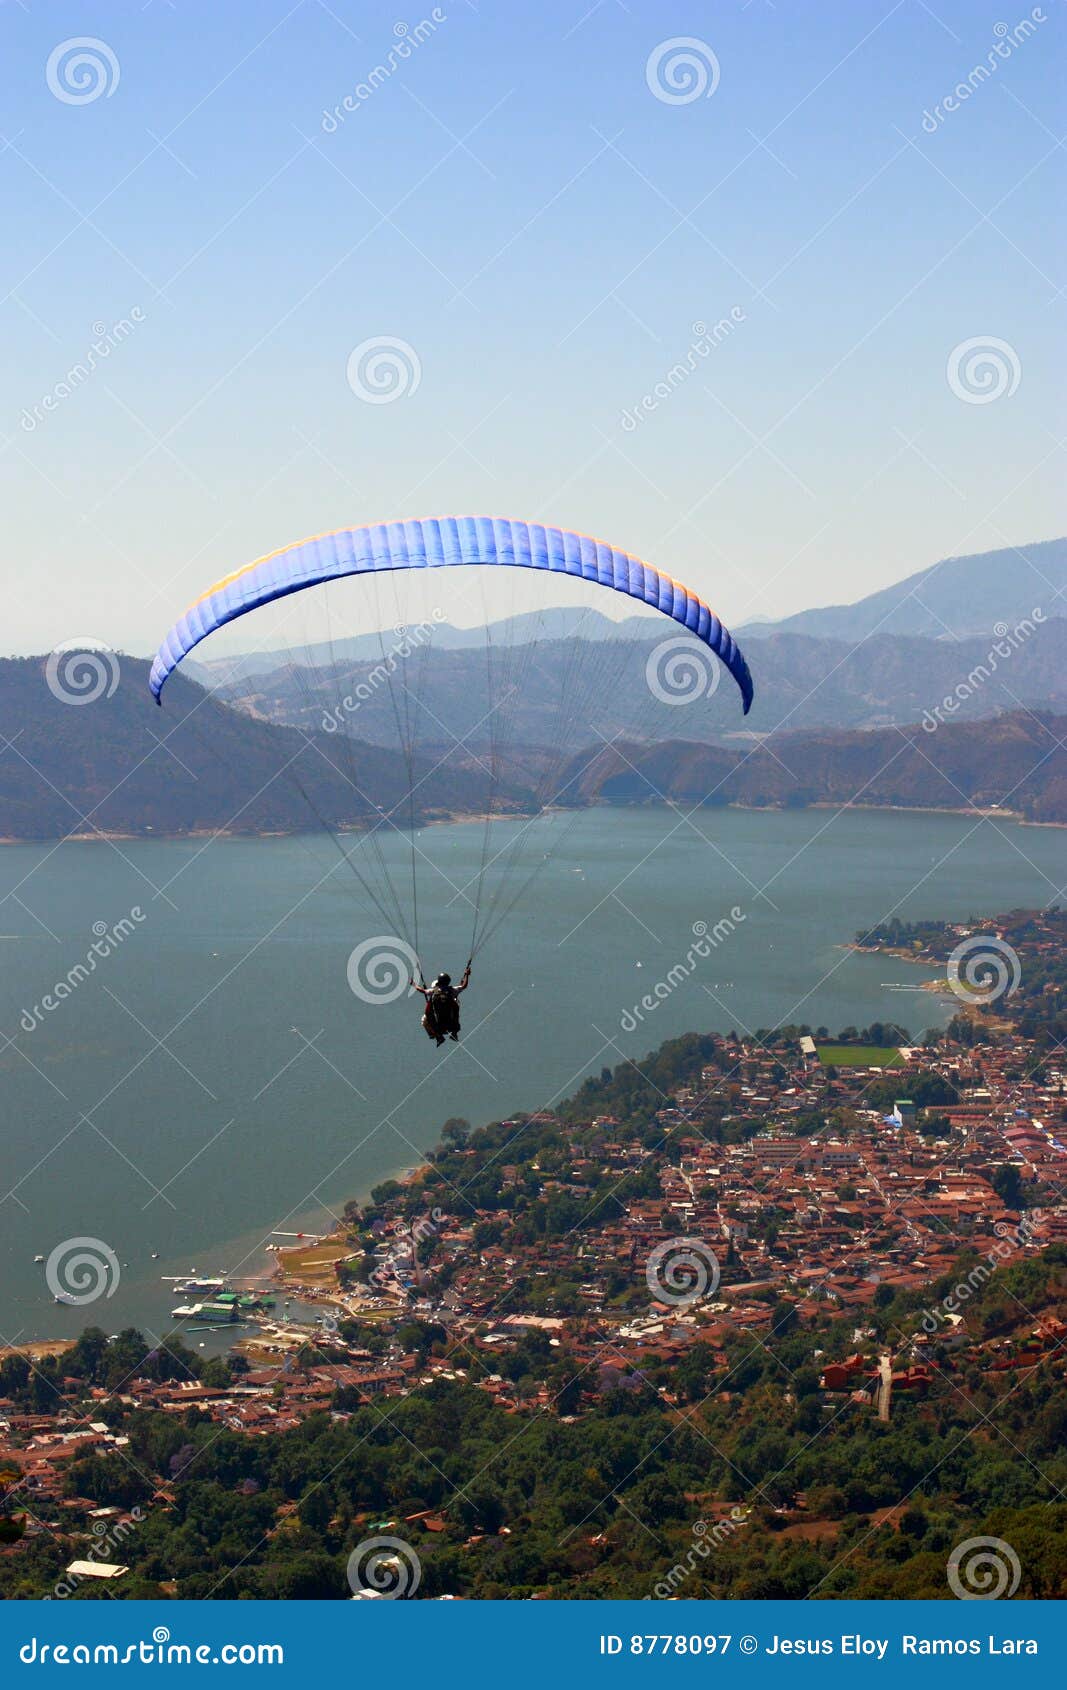 practicing paragliding over the lake of valle de bravo, mexico i